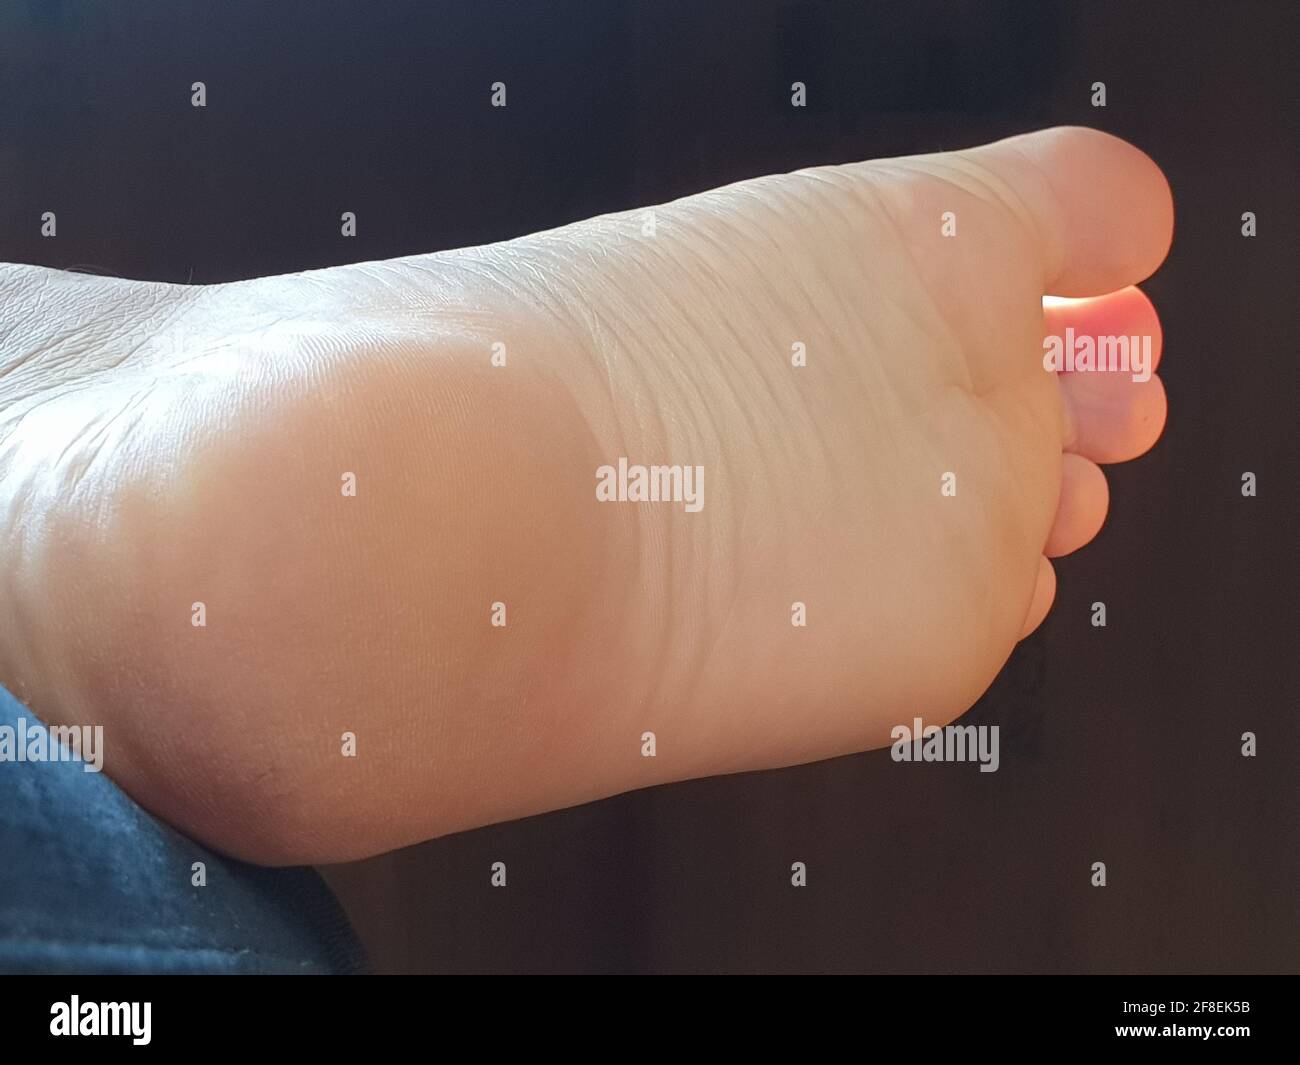 Foot lower side with heel and foot sole including fingers body parts and  human healthcare Stock Photo - Alamy